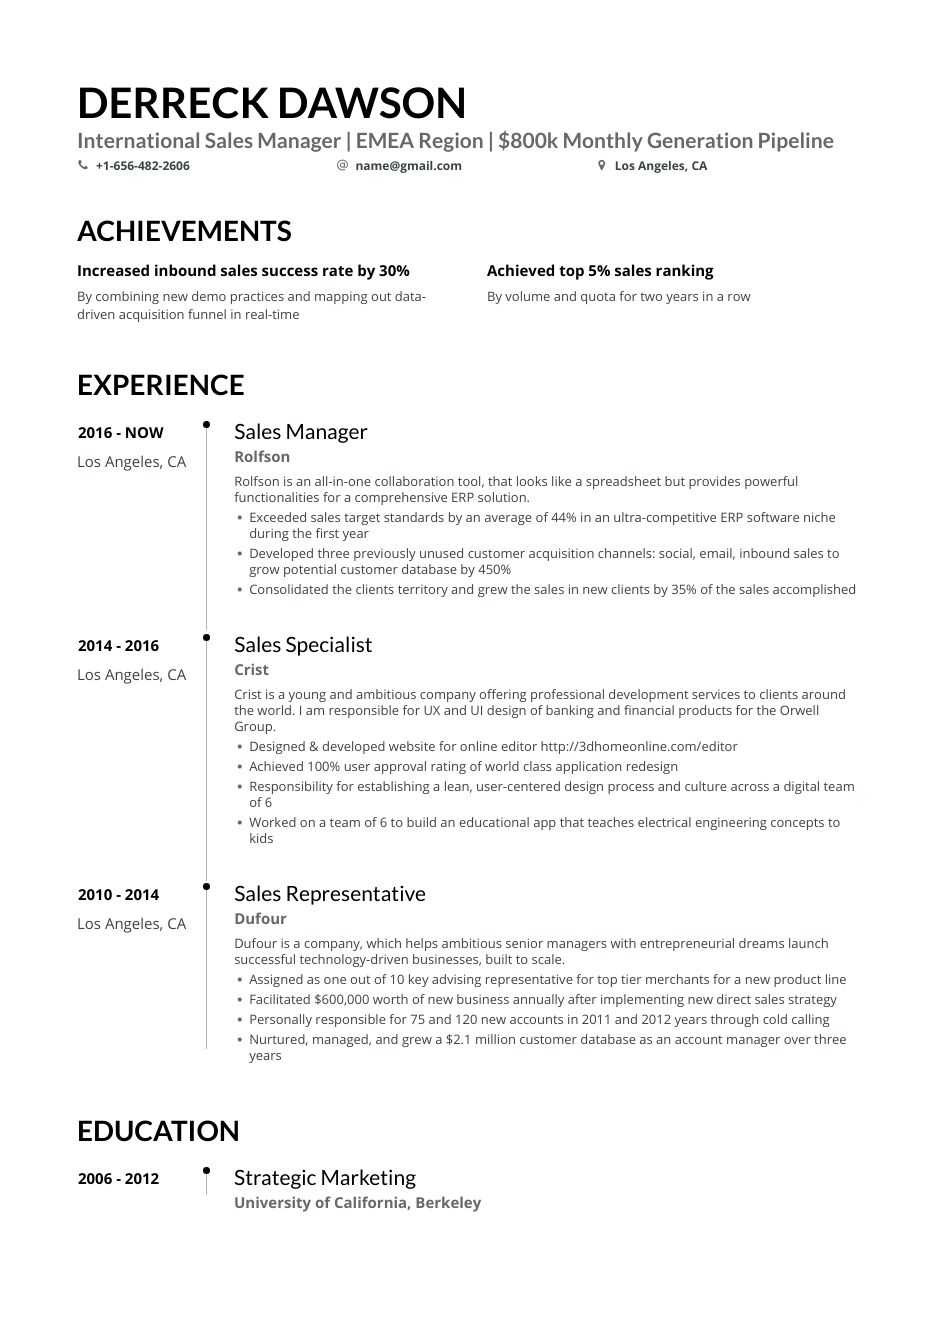 Sample Resume for Senior Sales Professional Sales Manager: Resume Examples for 2021